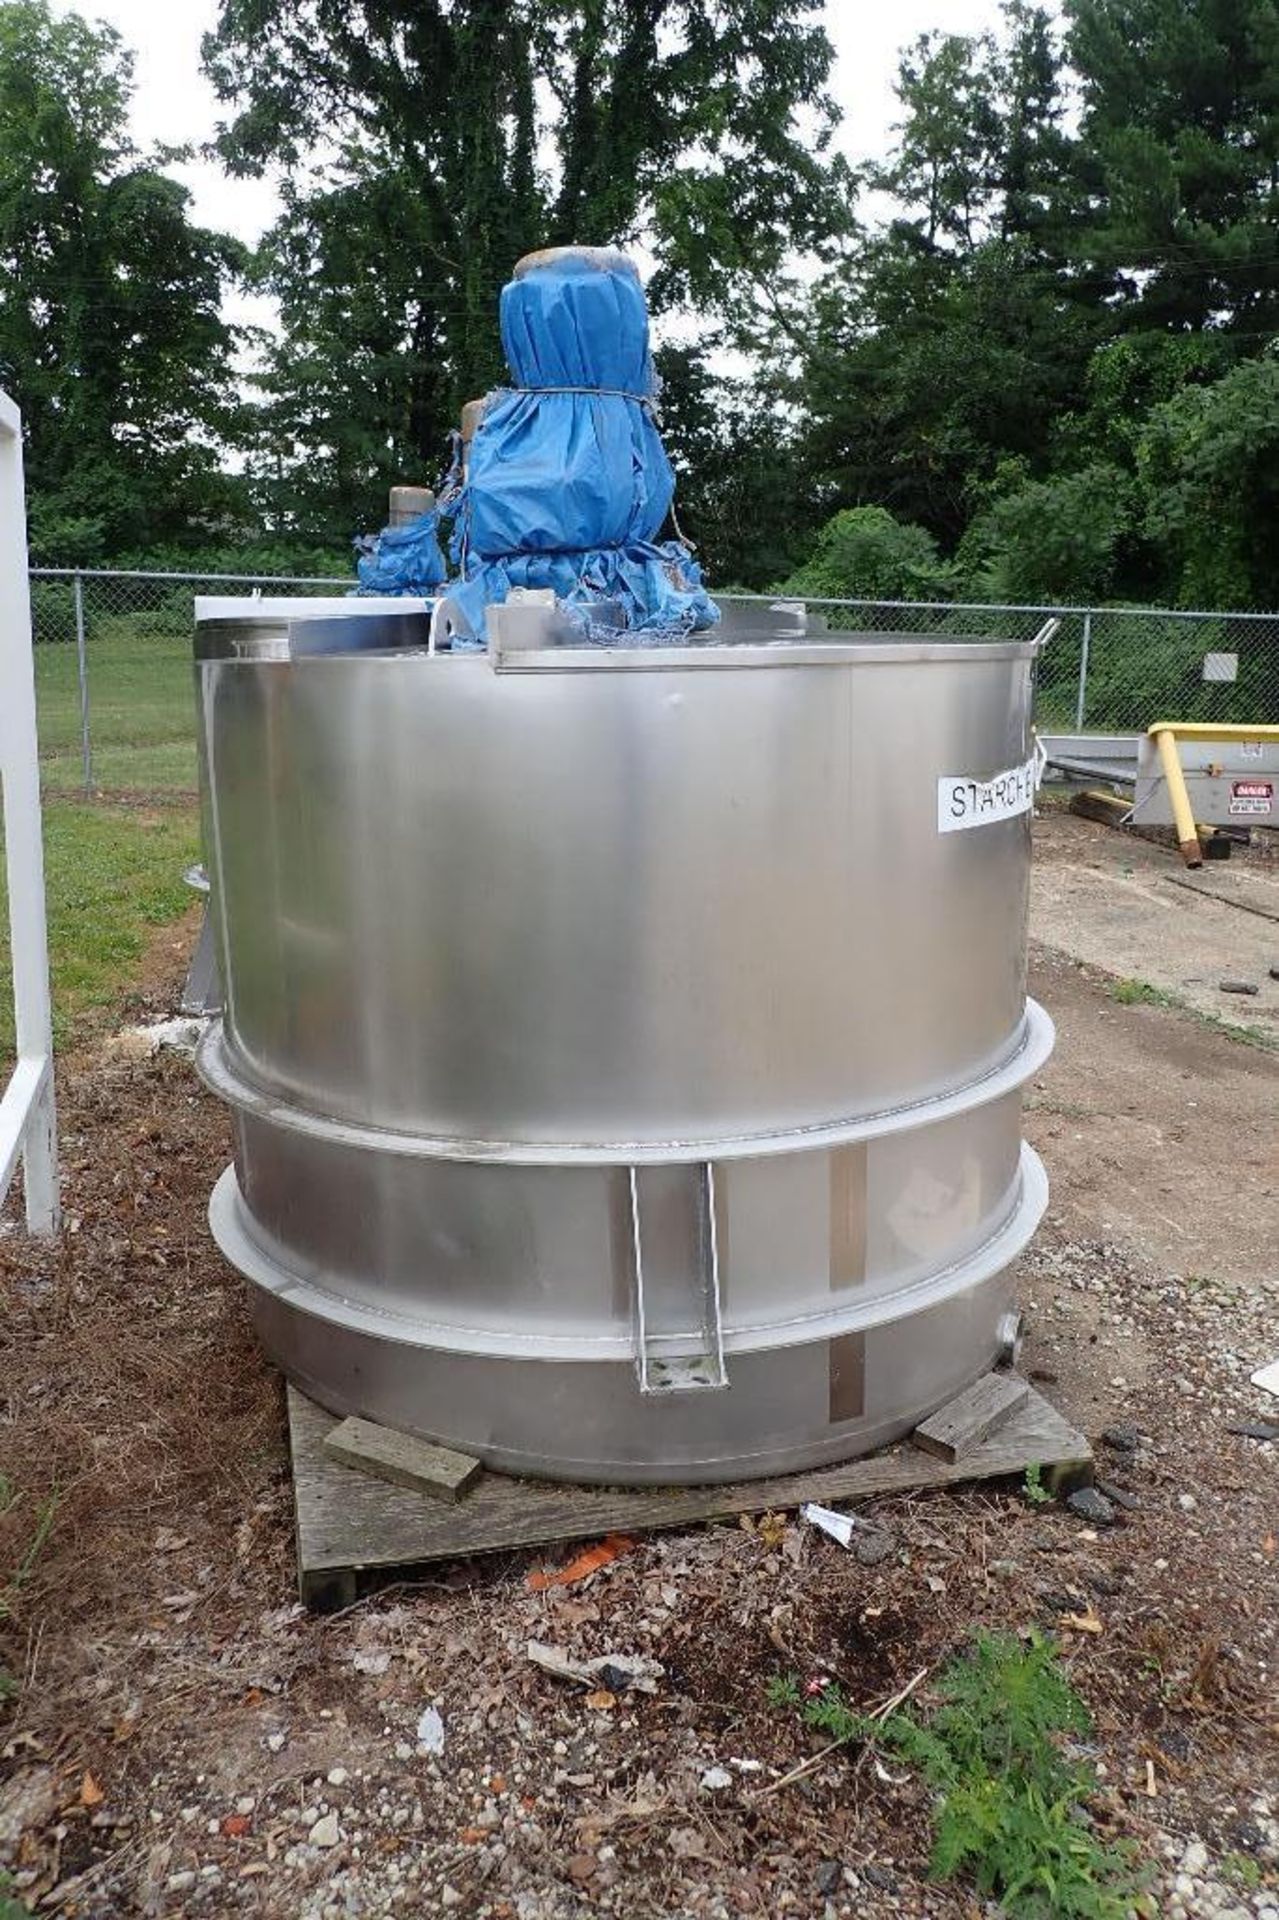 Sprinkman 900 gallon SS tank {Located in North East, PA} - Image 7 of 9